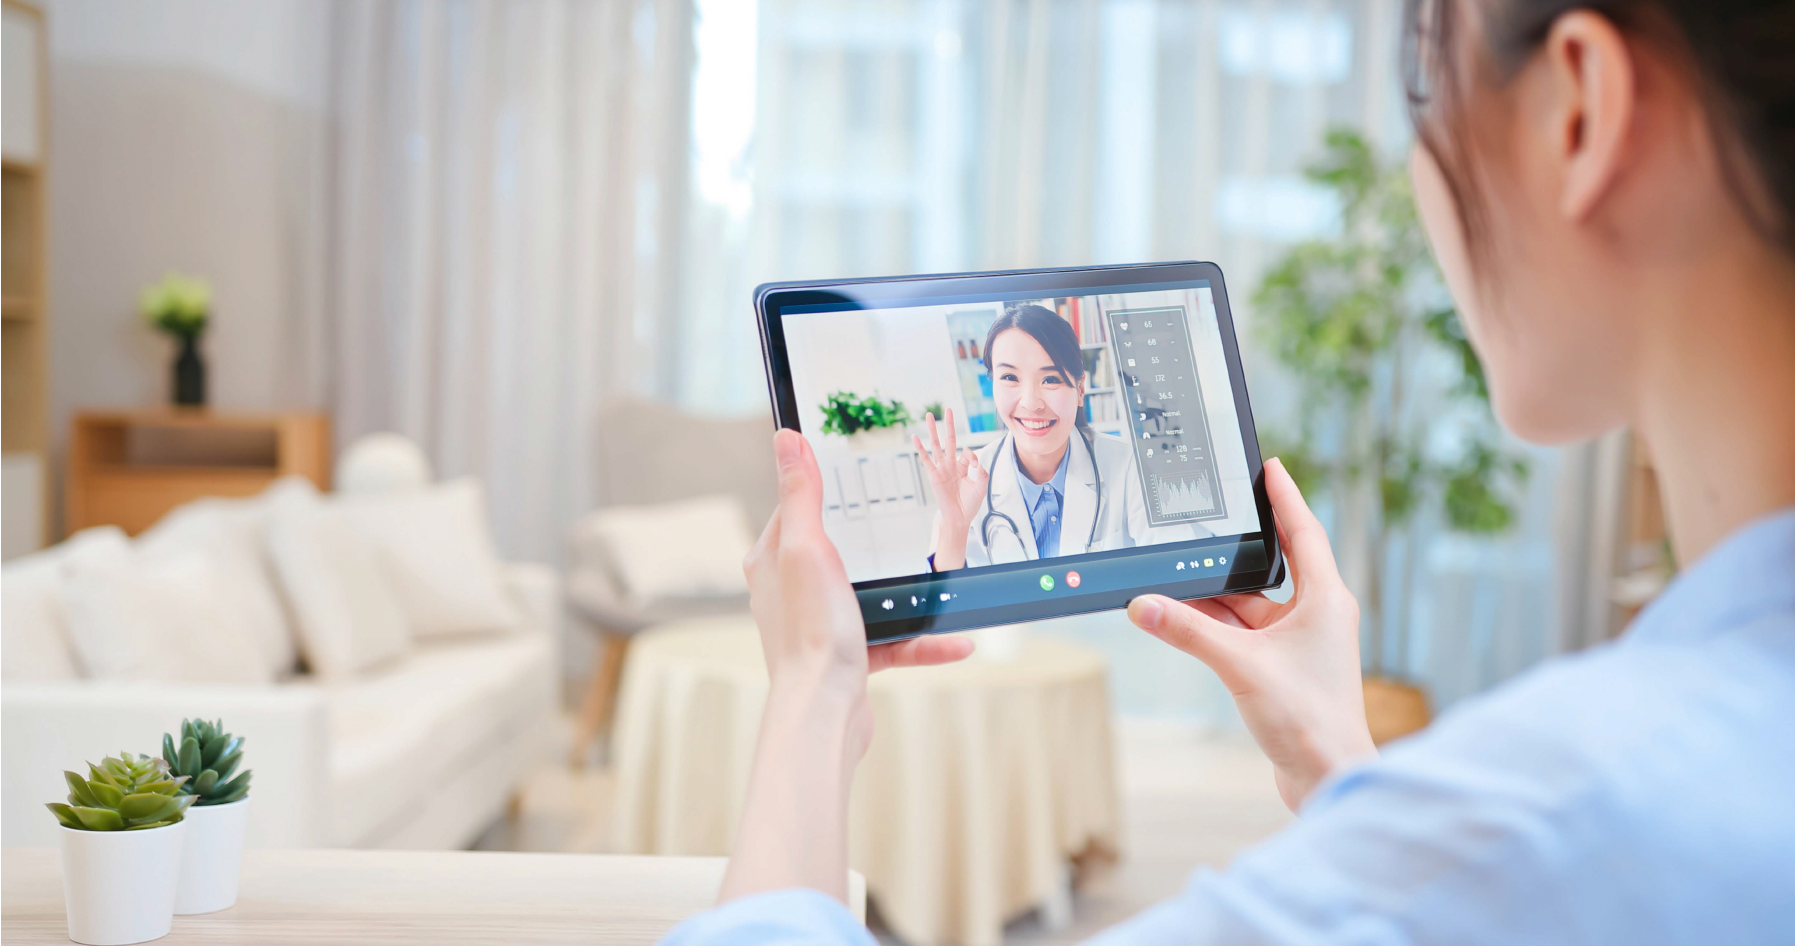 An Illustration of a Telehealth Visit